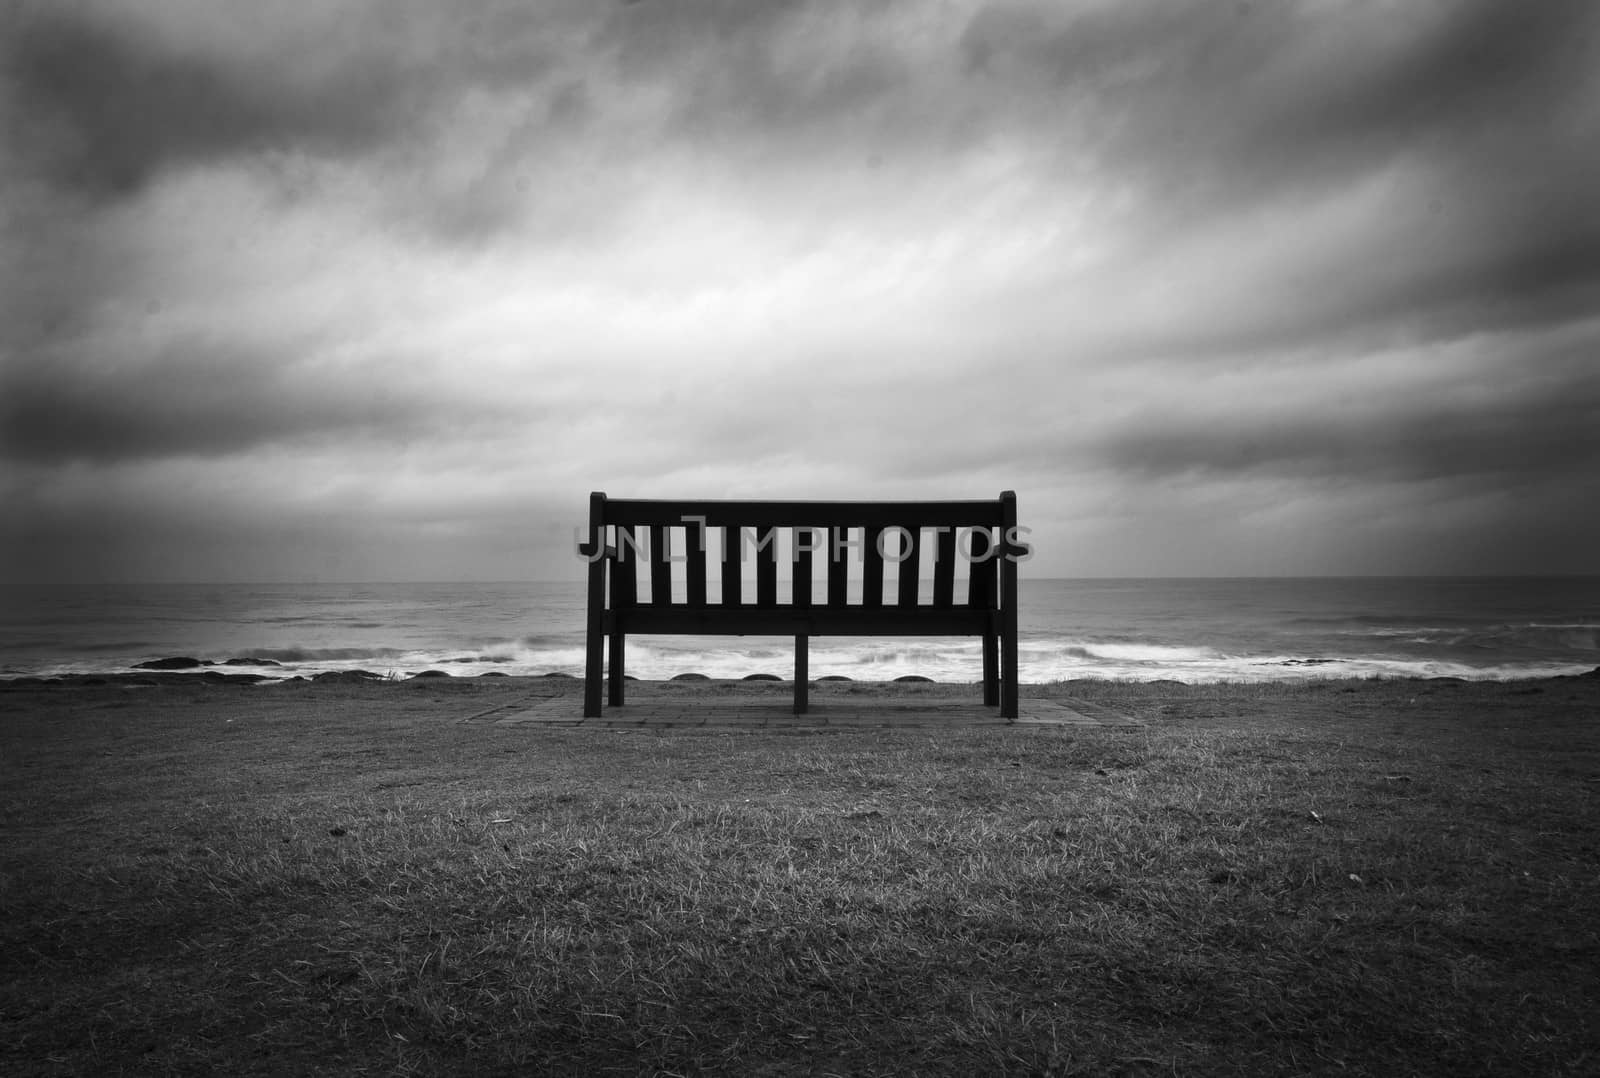 Lonely Bench facing the ocean and dramatic sky